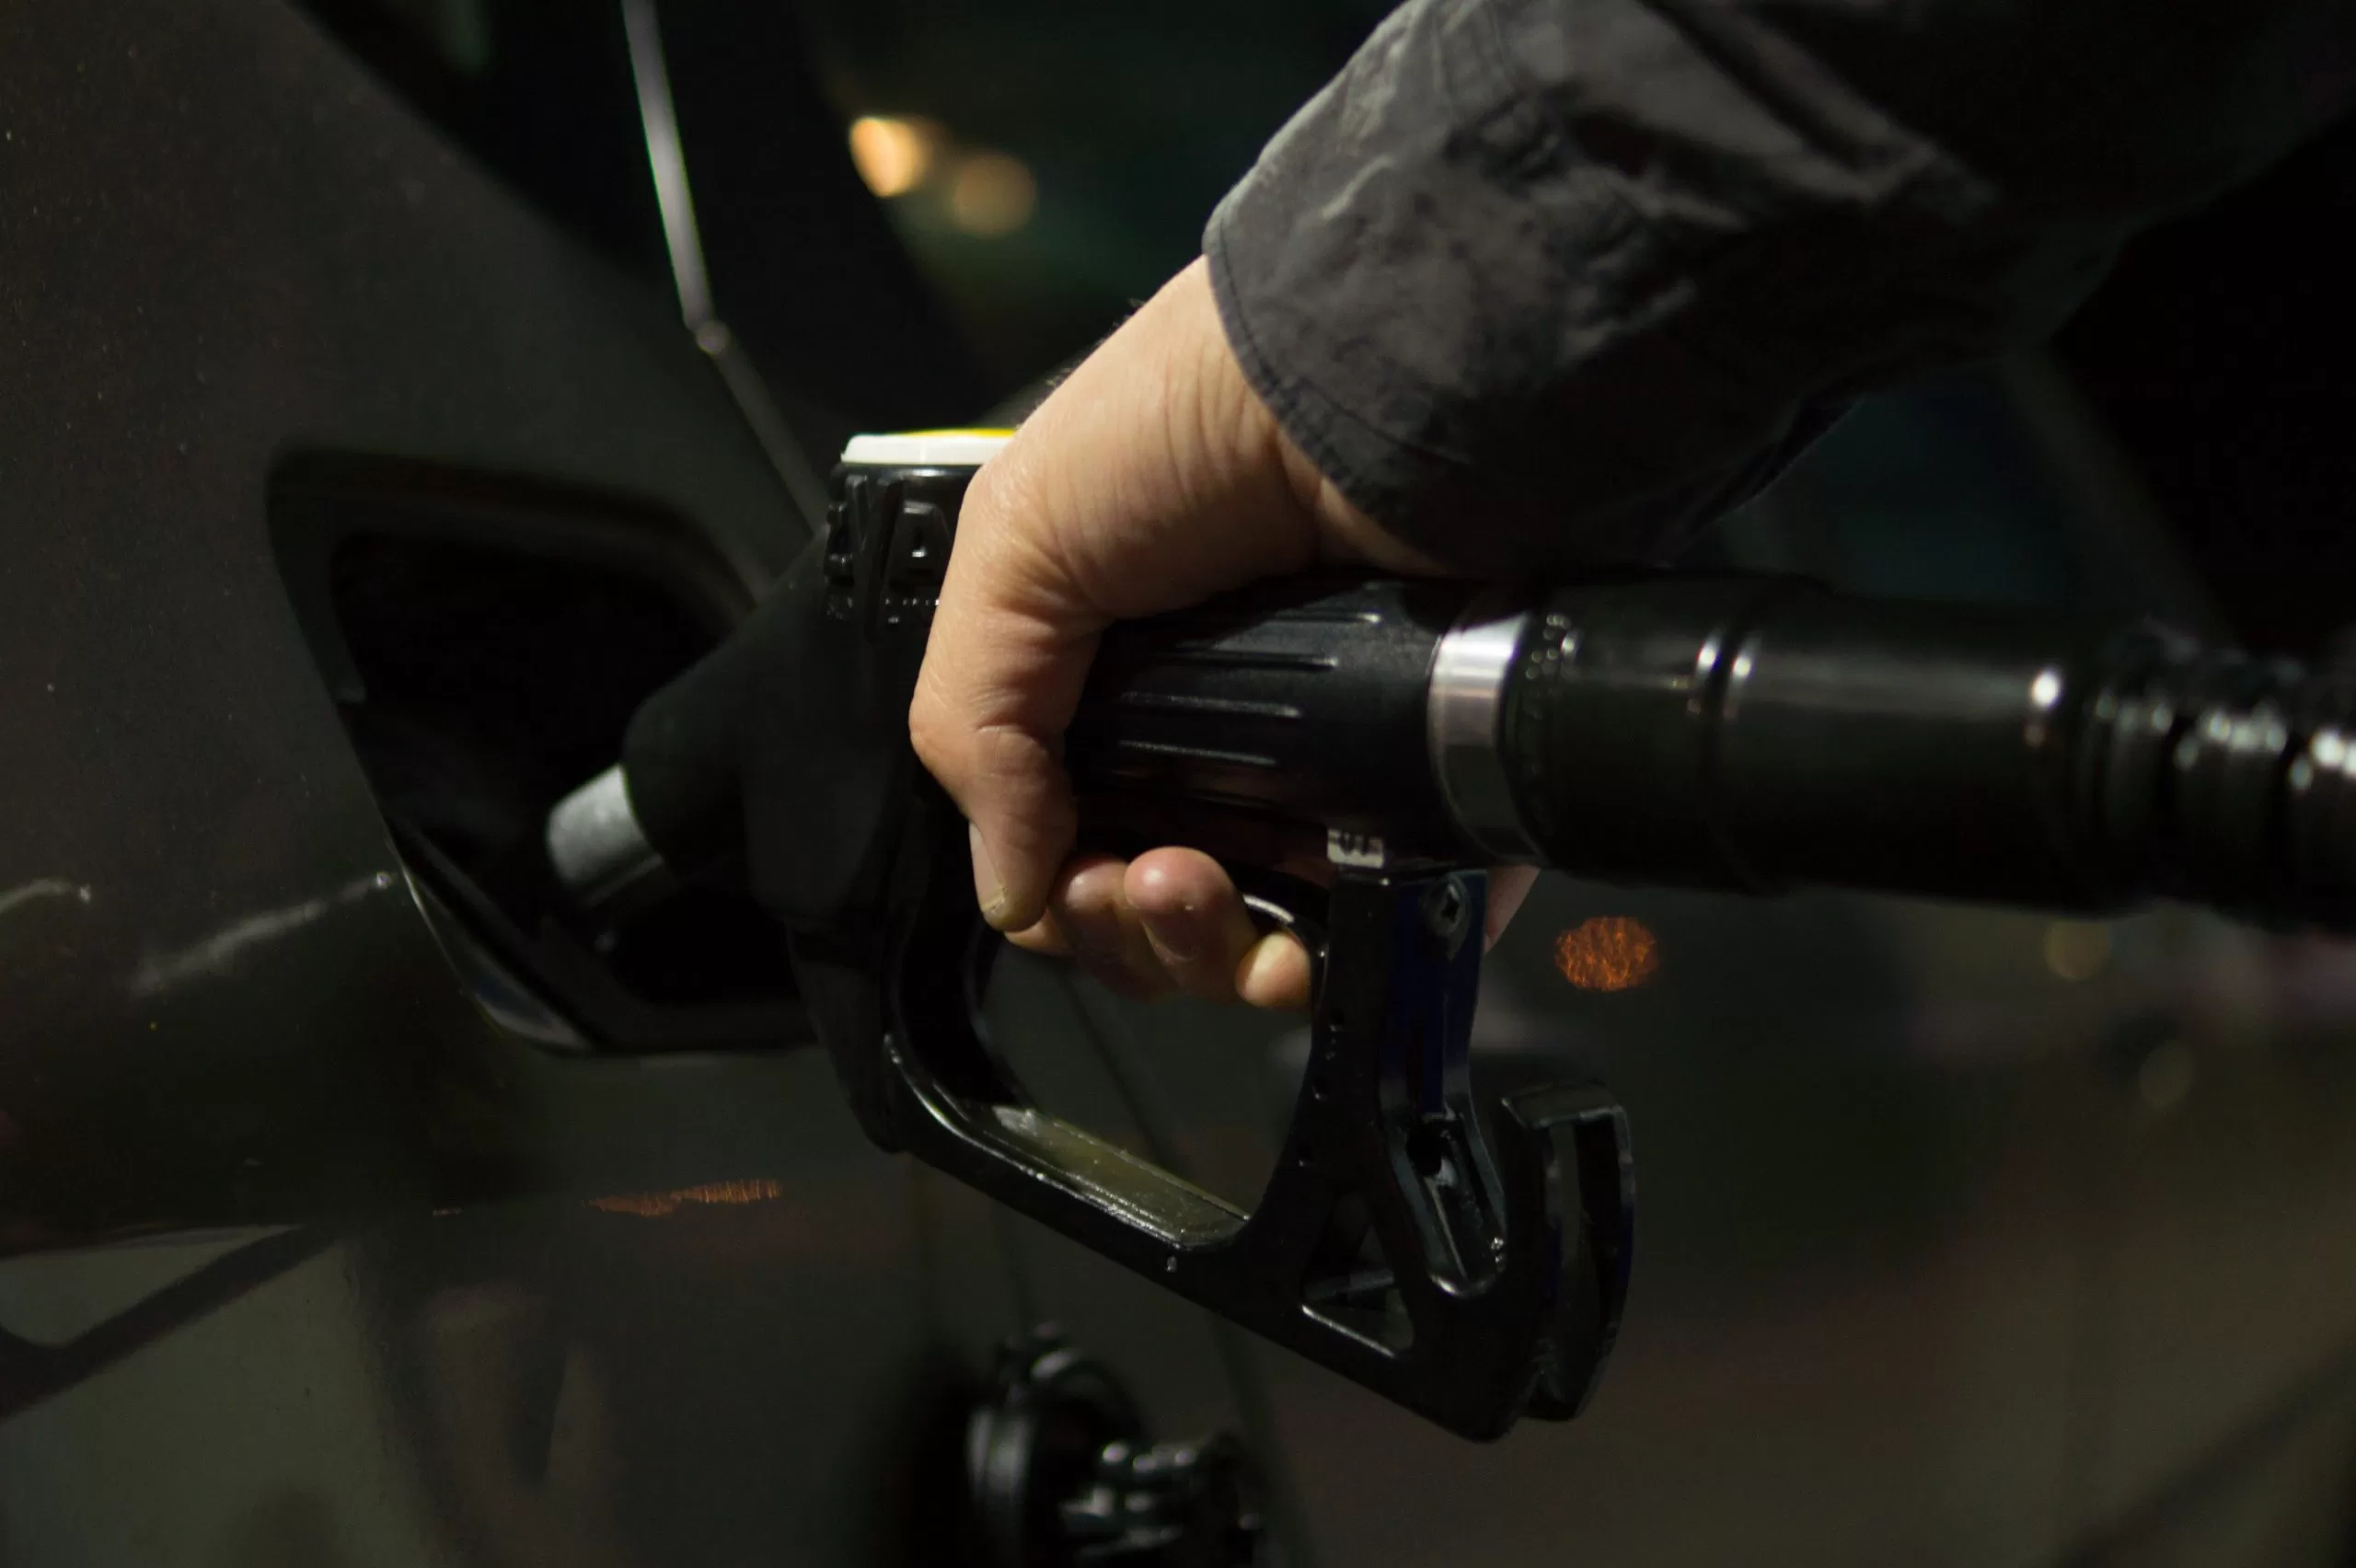 Image of a person filling fuel in a vehicle to denote the need to improve fleet fuel efficiency